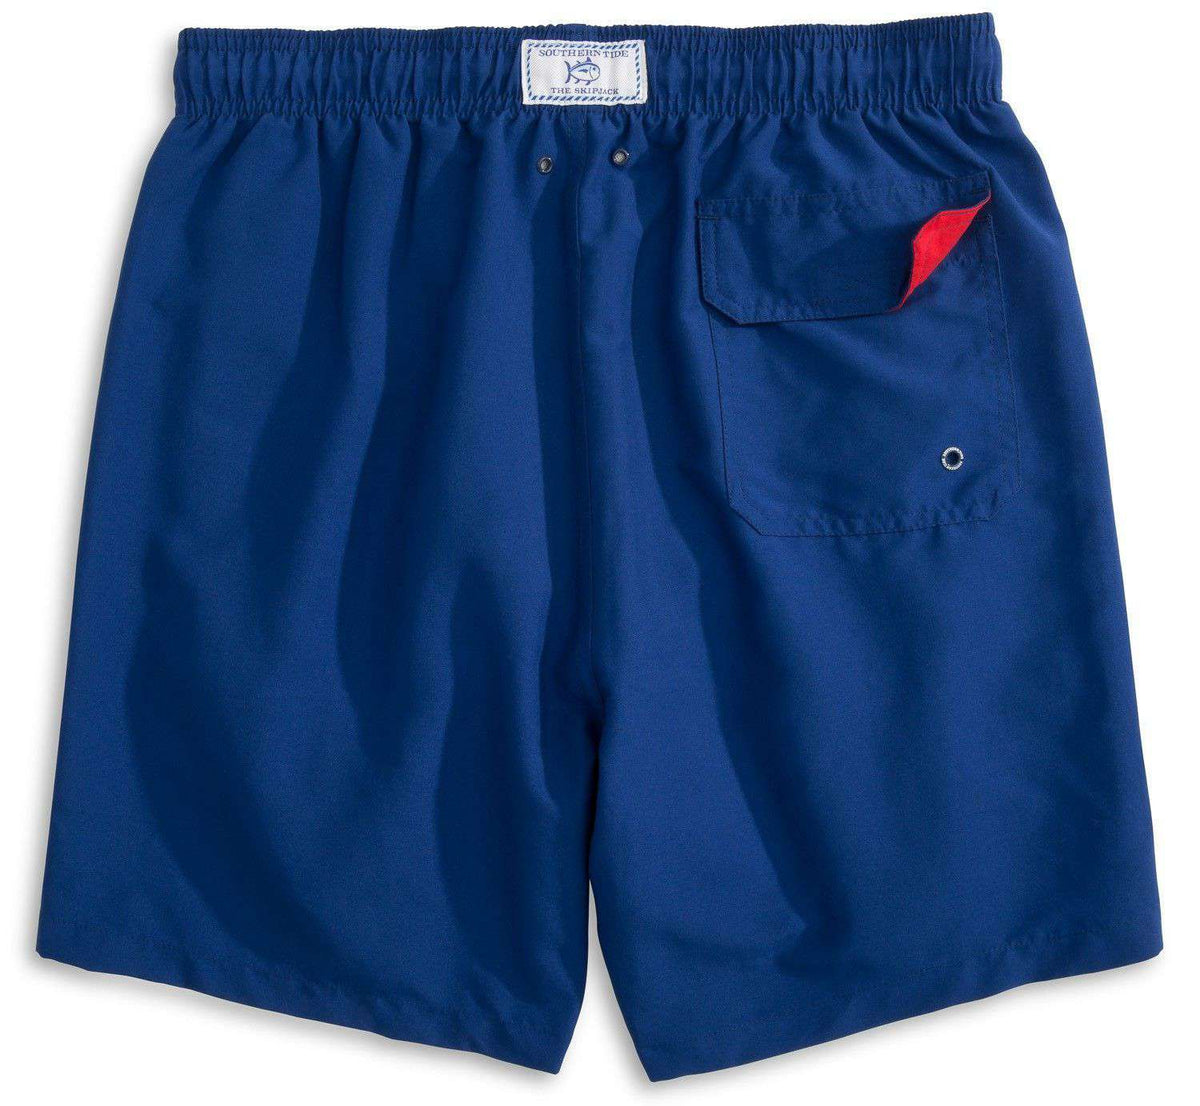 Solid Swim Trunks in Yacht Blue by Southern Tide - Country Club Prep